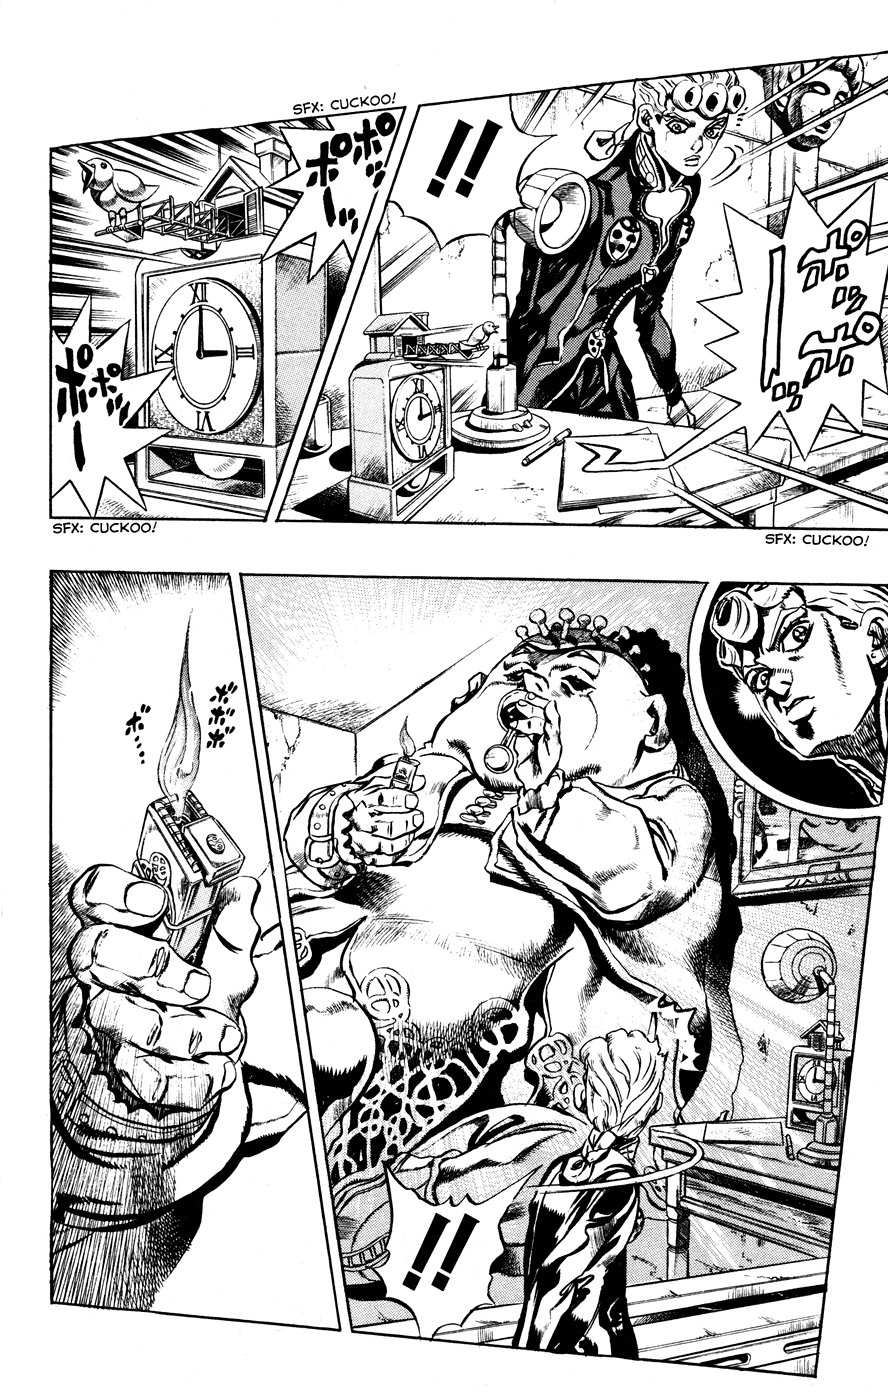 Jojo's Bizarre Adventure Part 5 - Vento Aureo Vol.2 Chapter 10: Meet The Gangster Behind The Wall Part 2 - Picture 2